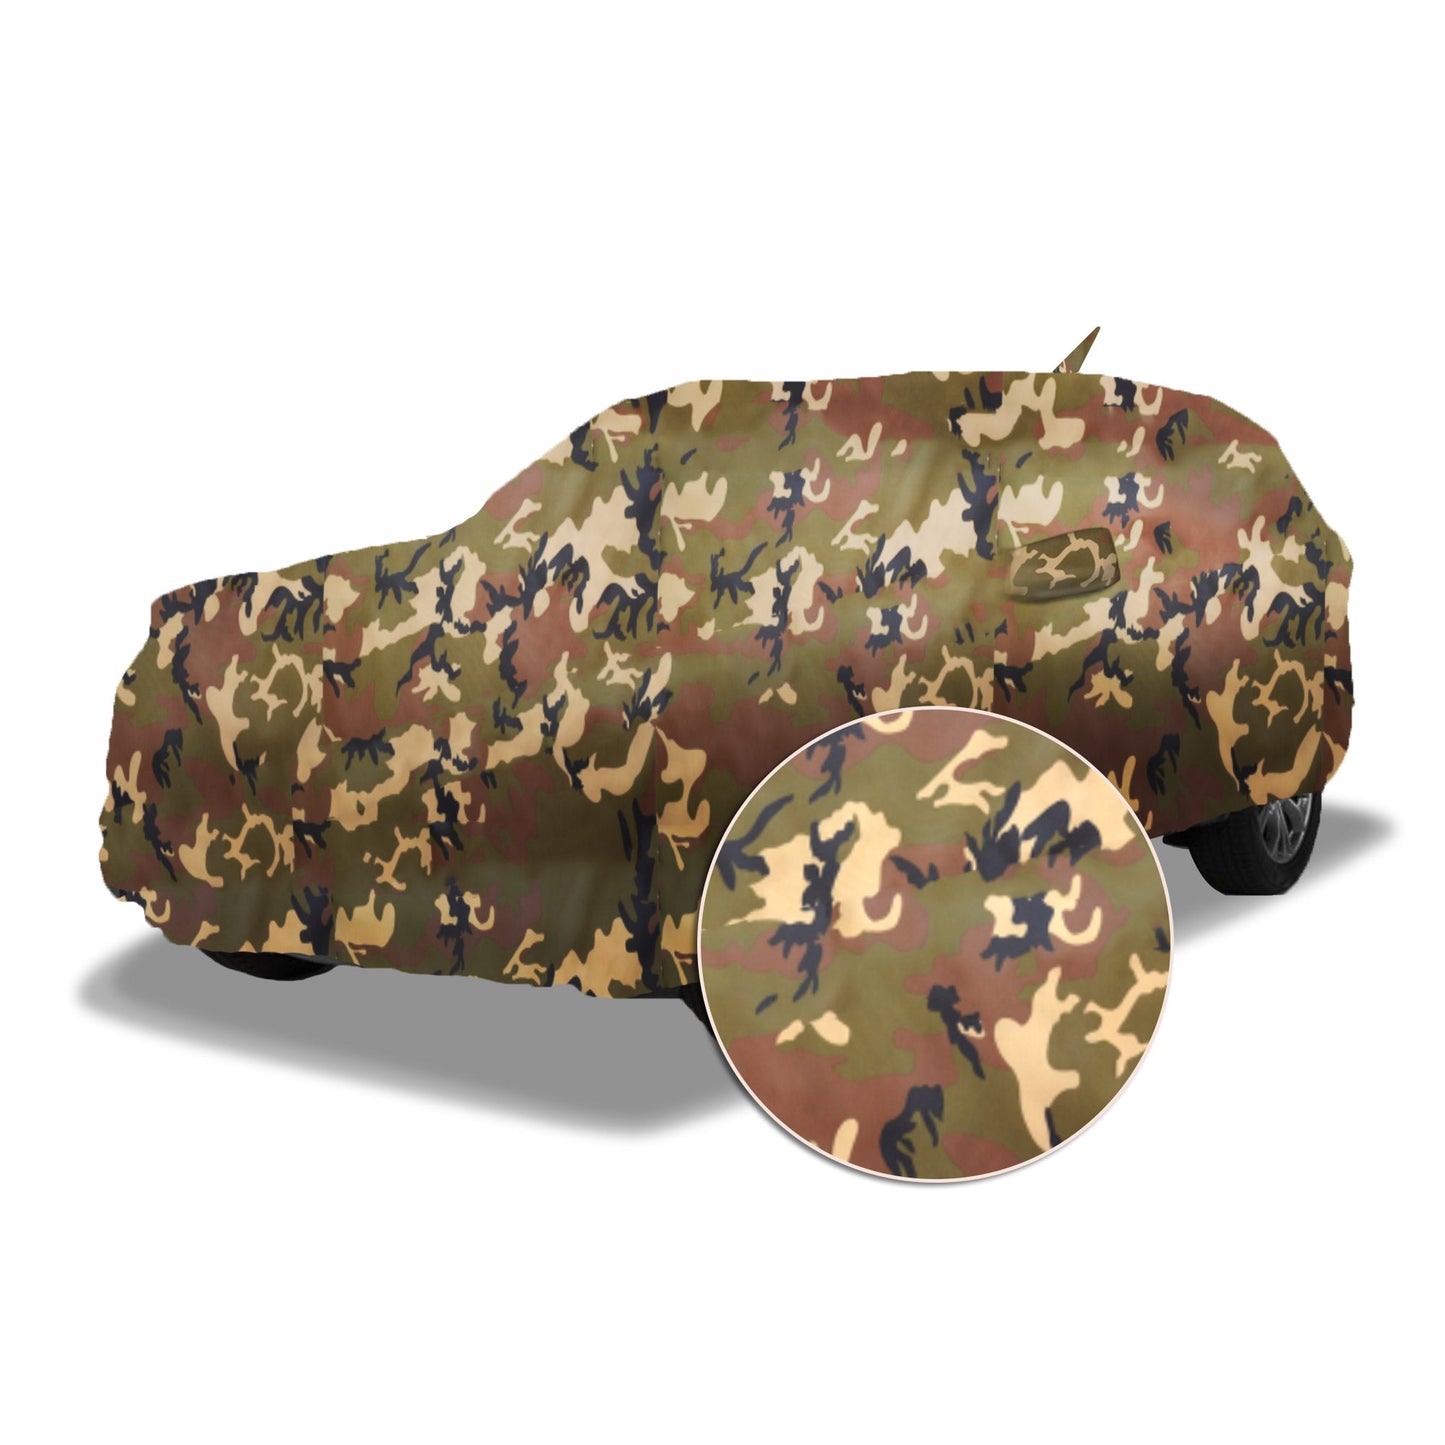 Ascot Mercedes-Benz GLA 2020-2024 Model Car Body Cover Extra Strong & Dust Proof Jungle Military Car Cover with UV Proof & Water-Resistant Coating